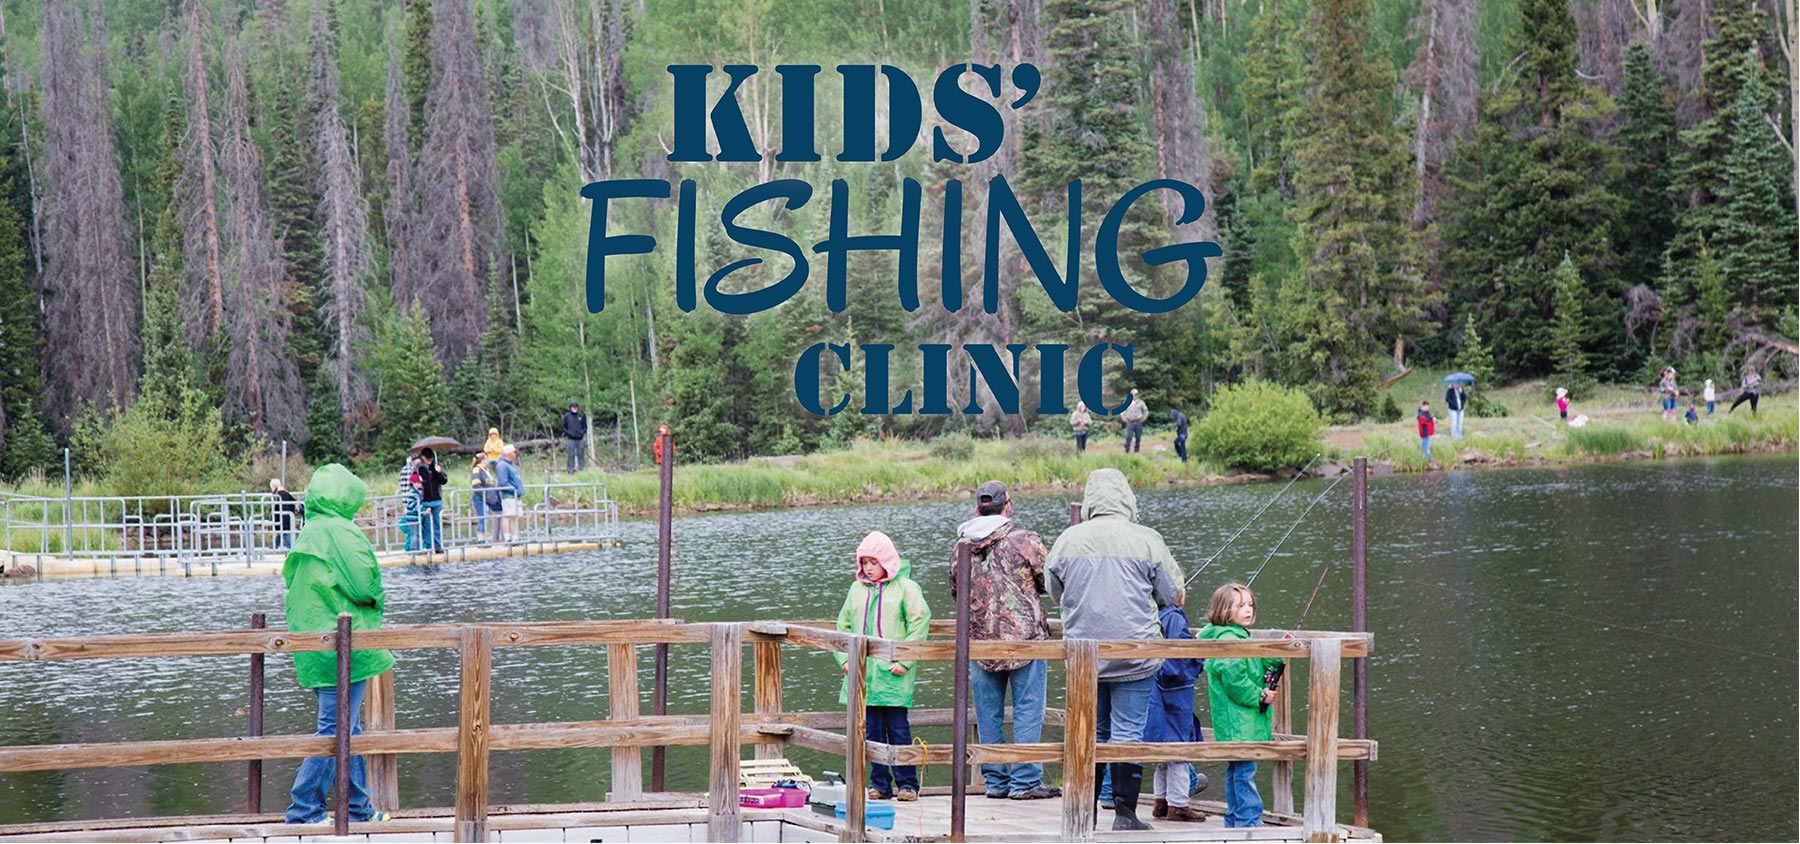 South Fork Kids' Fishing Clinic